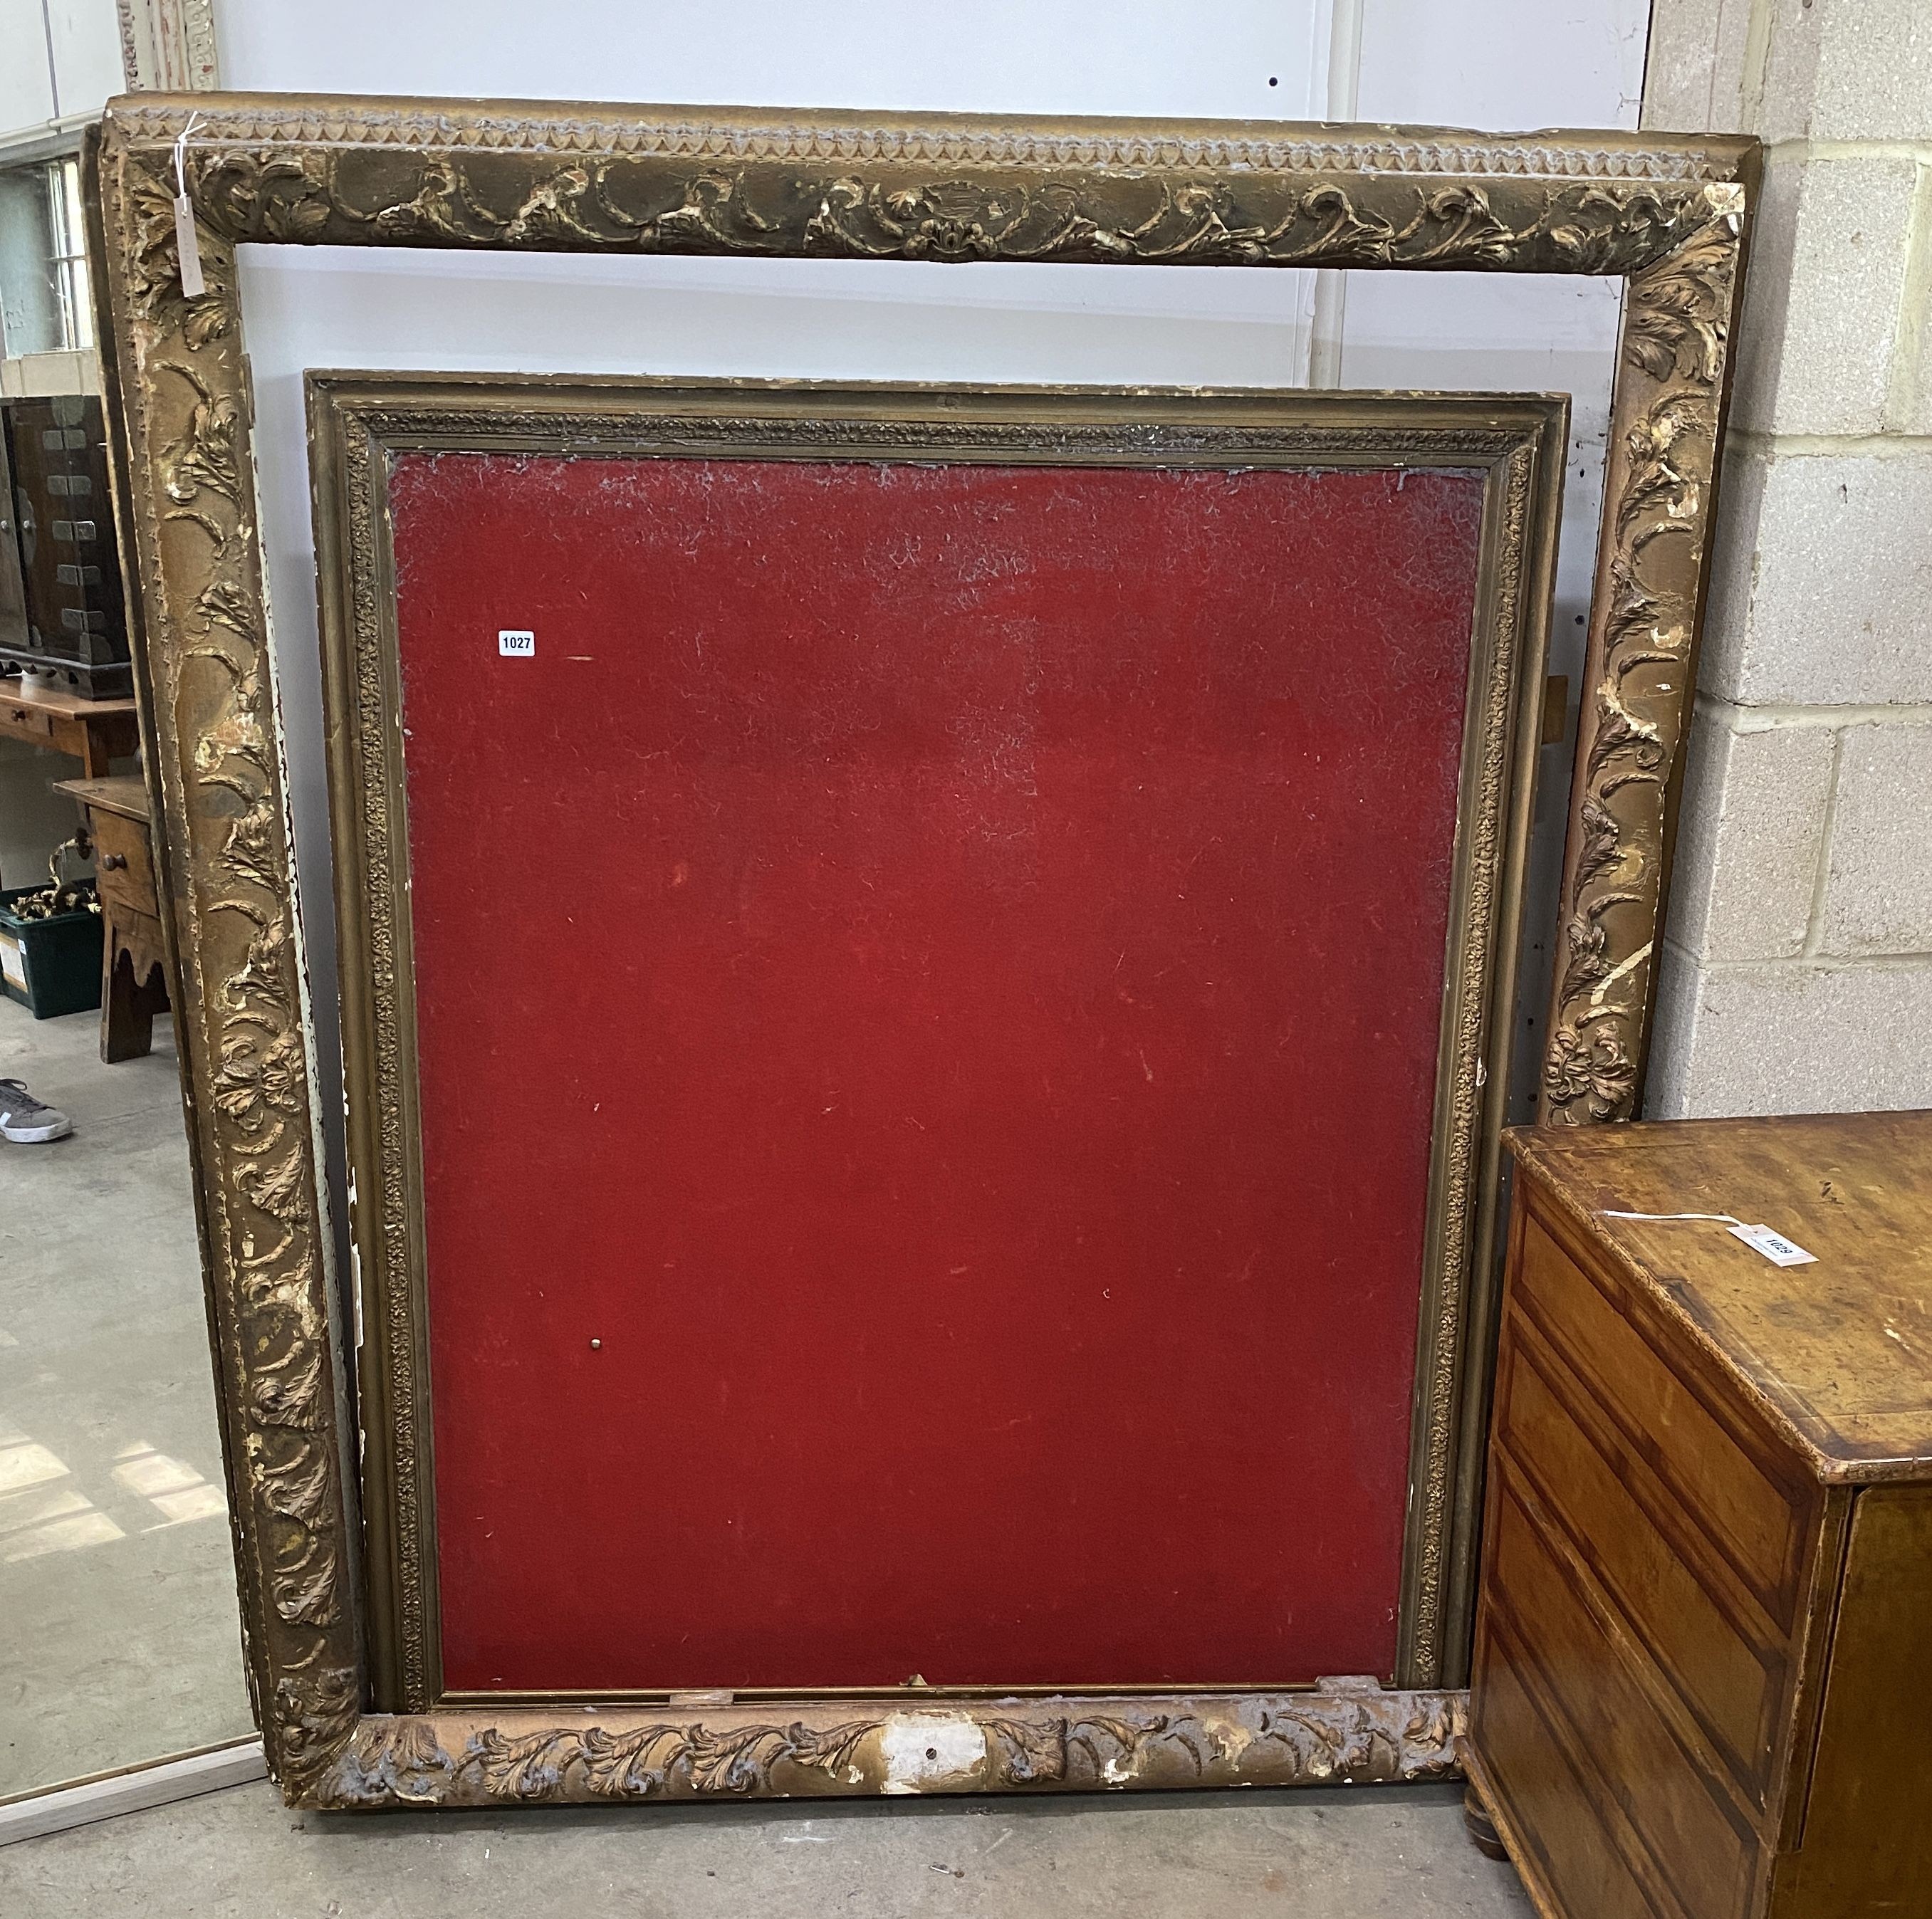 A 19th century giltwood and gesso rectangular frame with inner moulded slip, converted to a notice